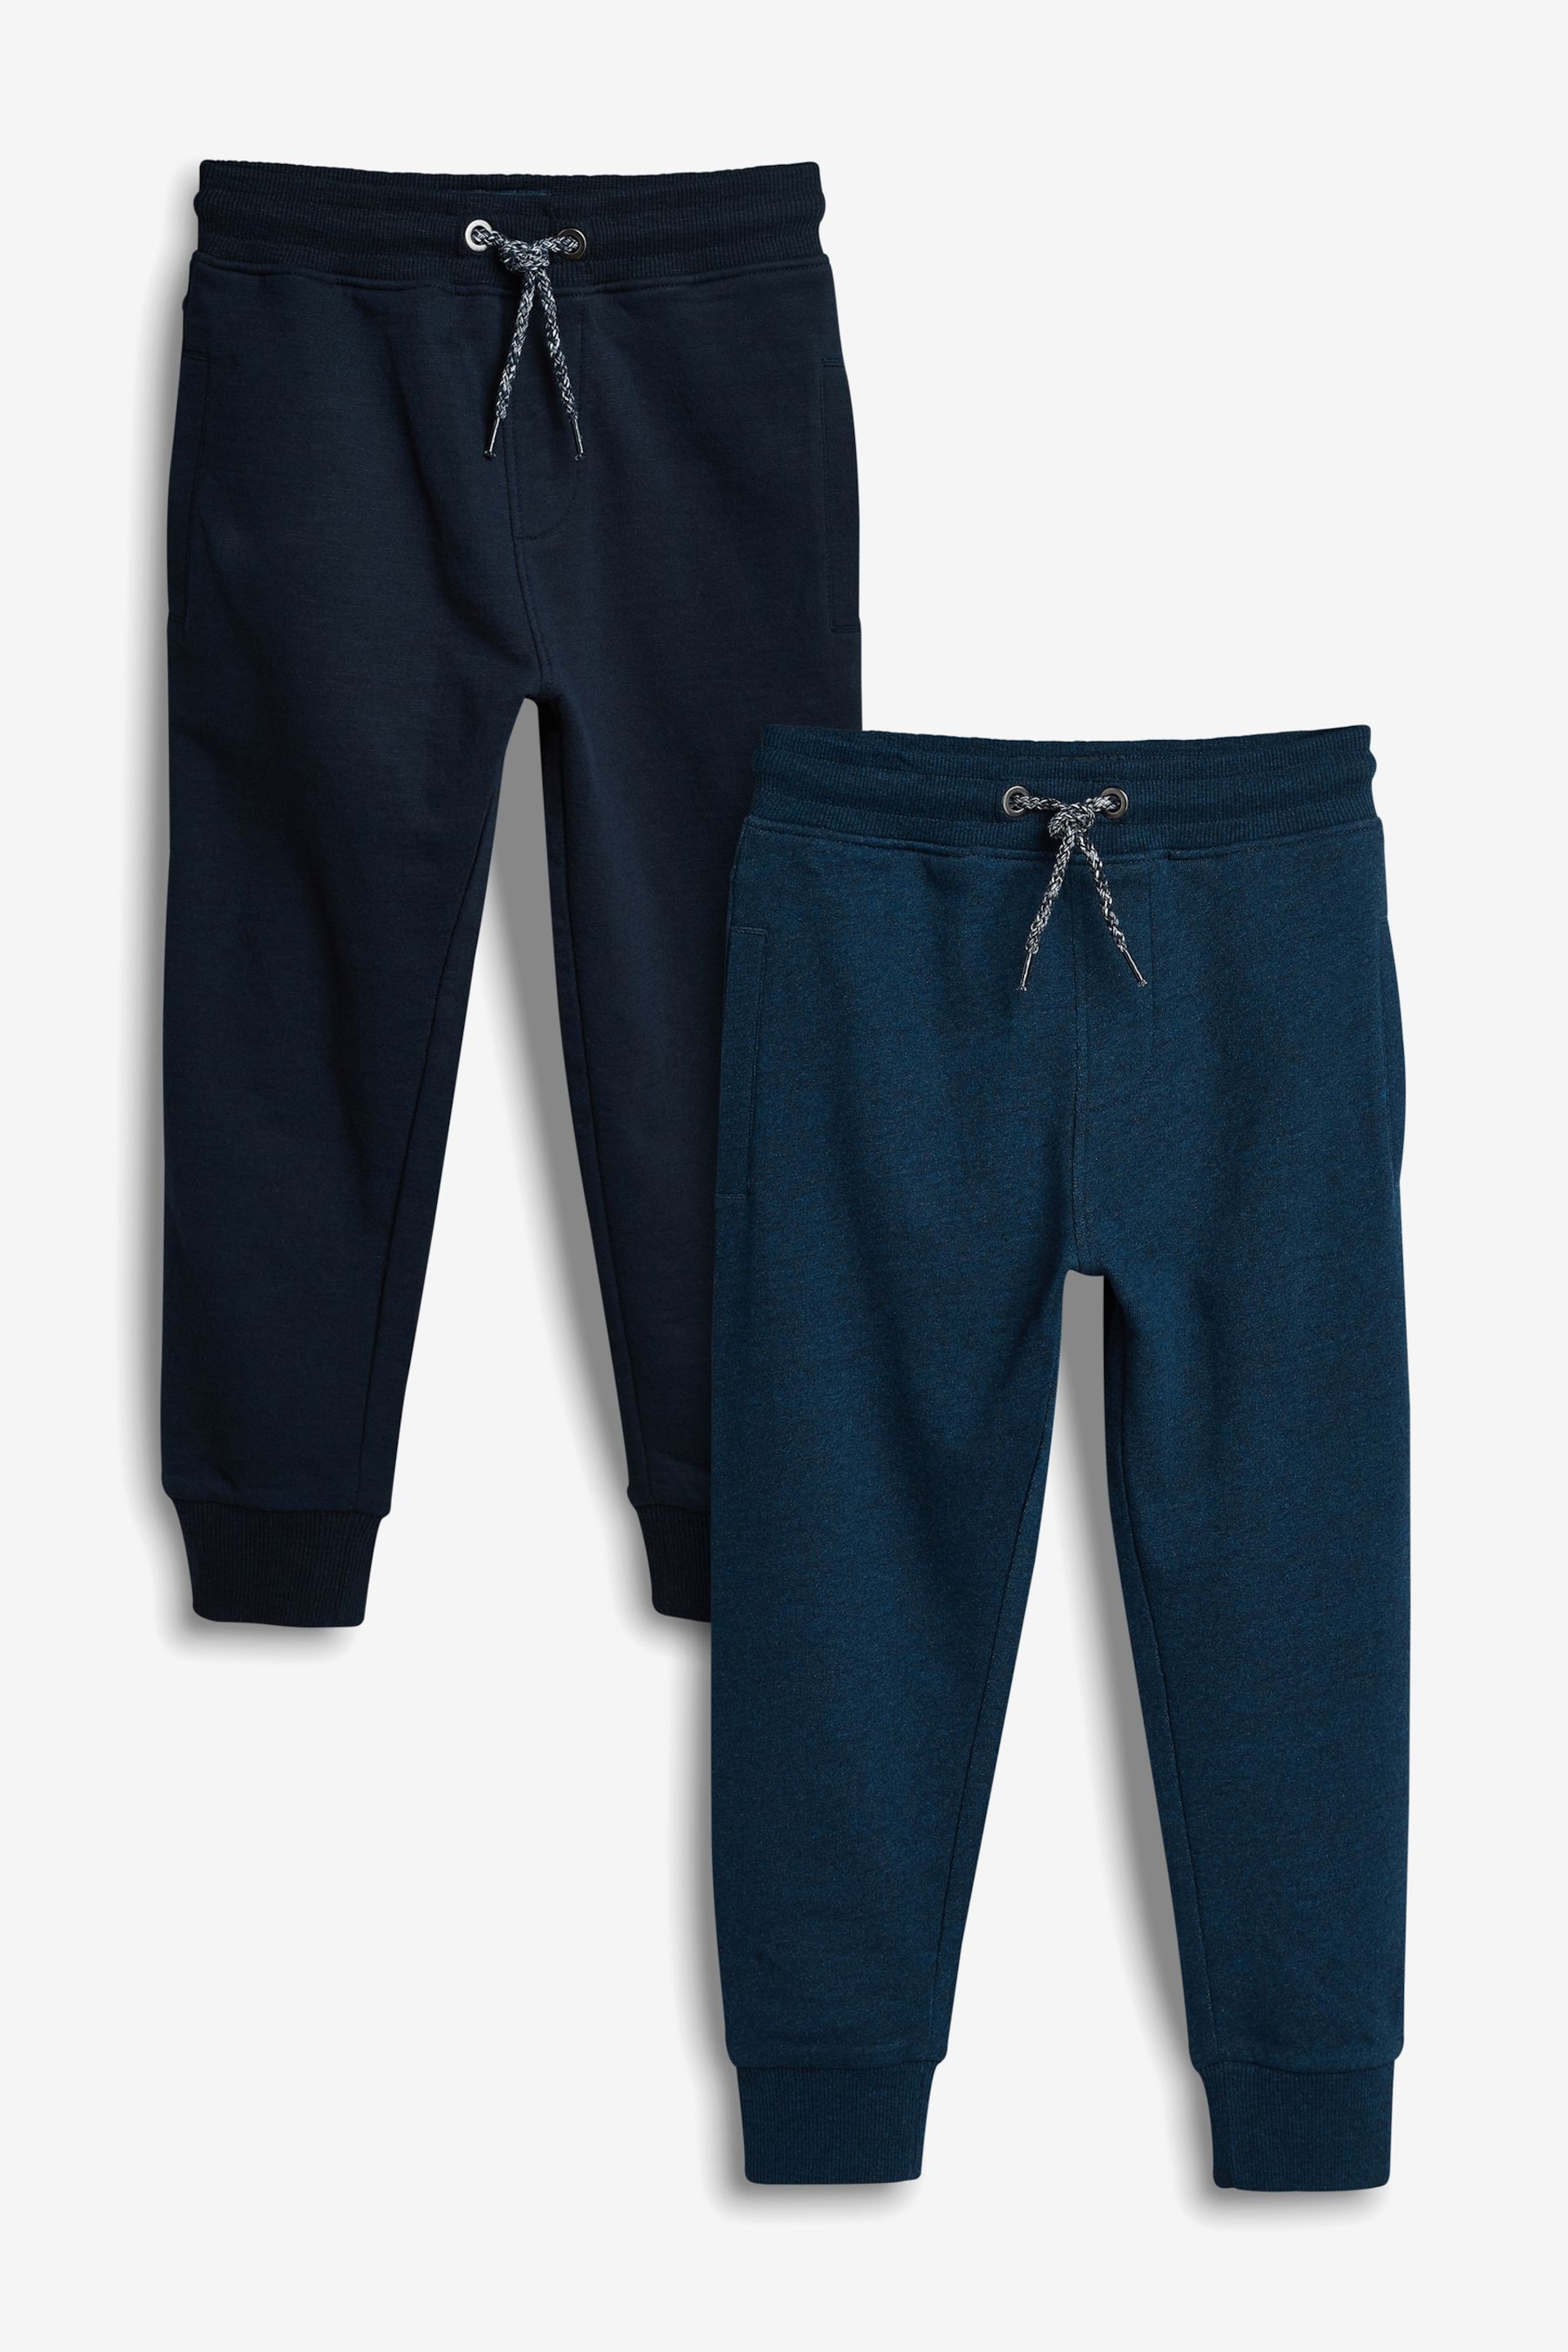 Blue/Navy Slim Fit Cotton Rich 2 Pack Joggers (3-16yrs) - Image 1 of 3